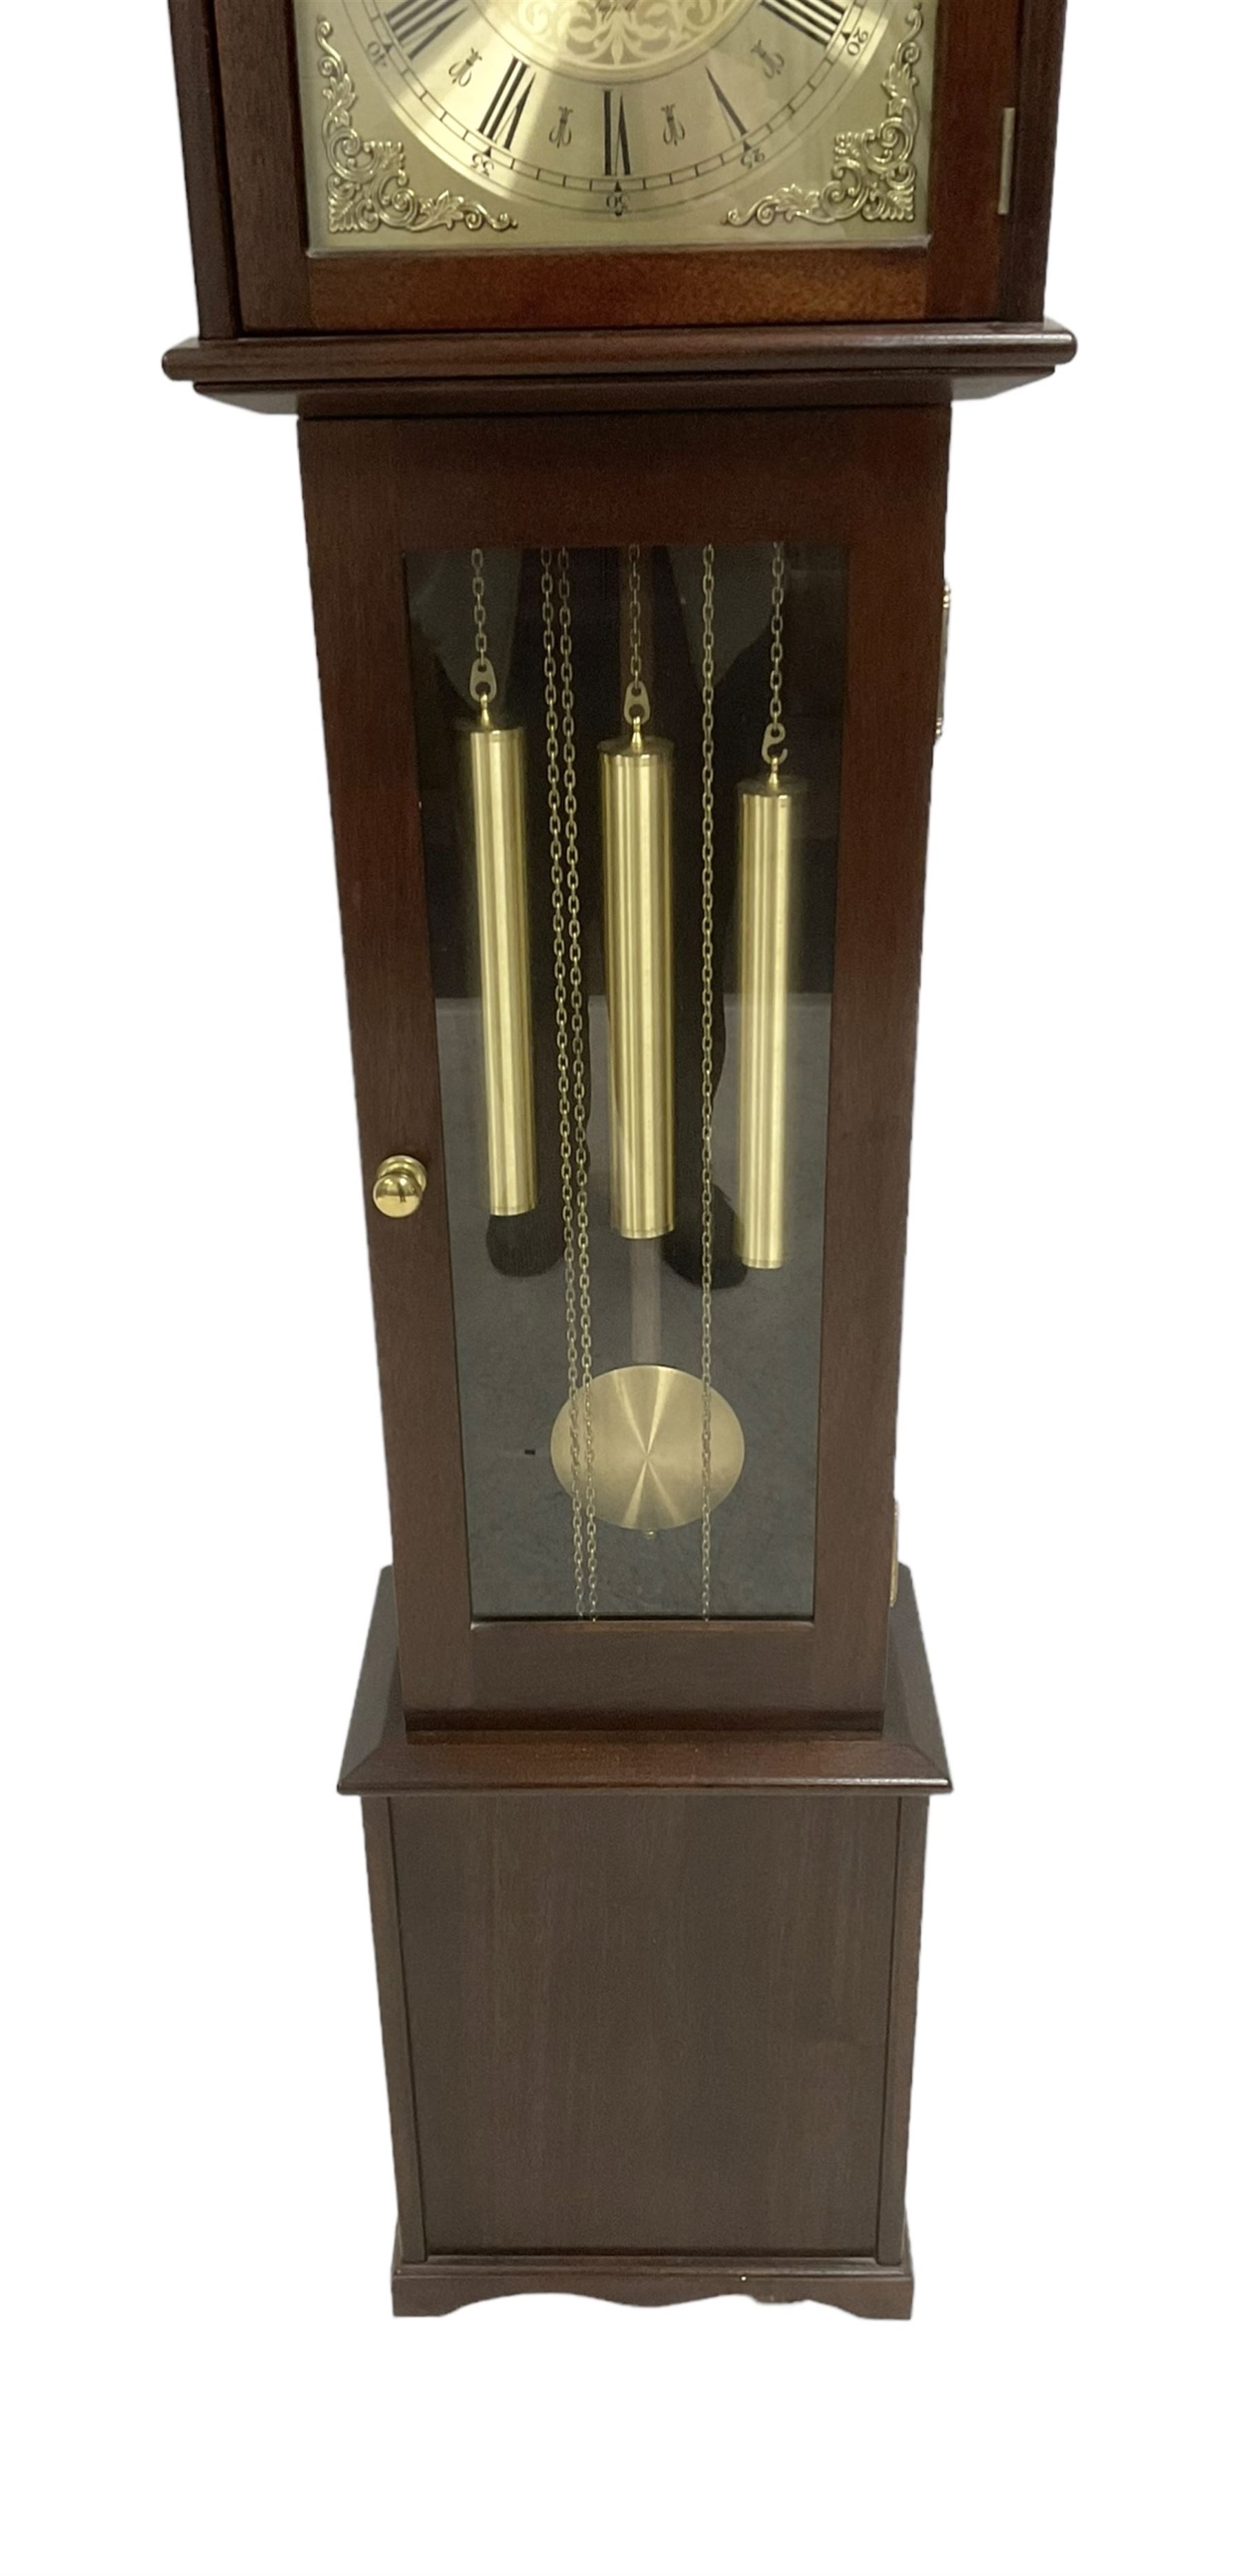 20th century - weight driven 8-day mahogany grandmother clock with a swans neck pediment and fully g - Image 5 of 6